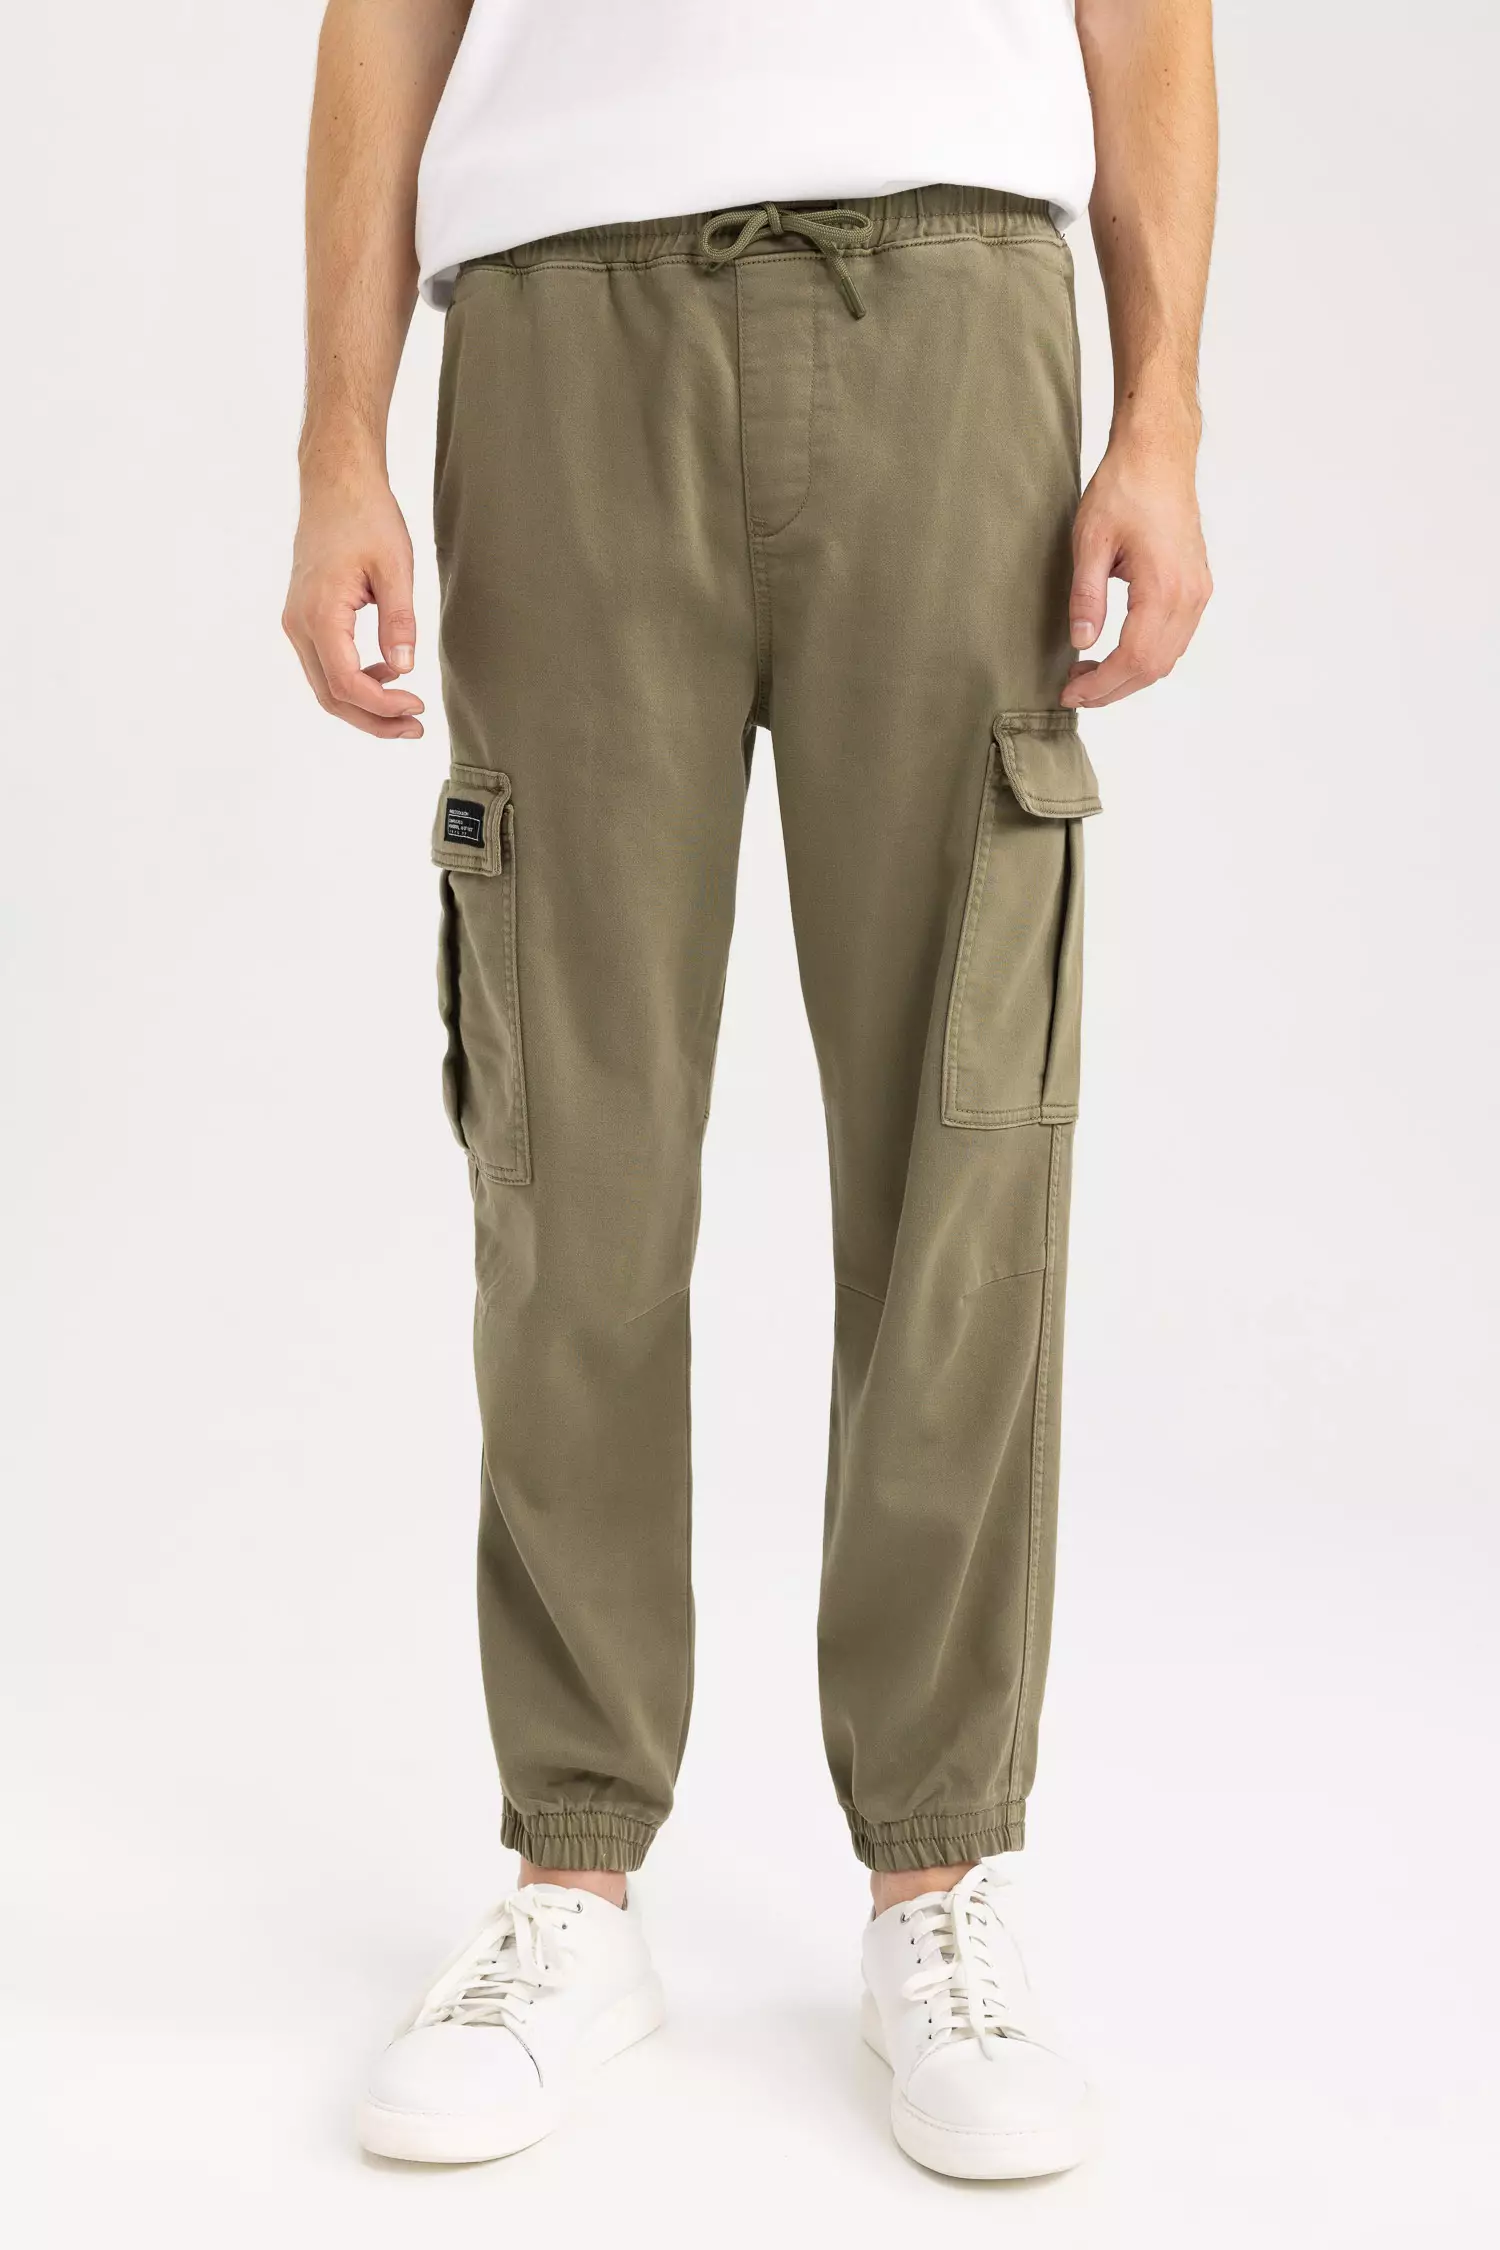 Jogger Style Cargo Pants